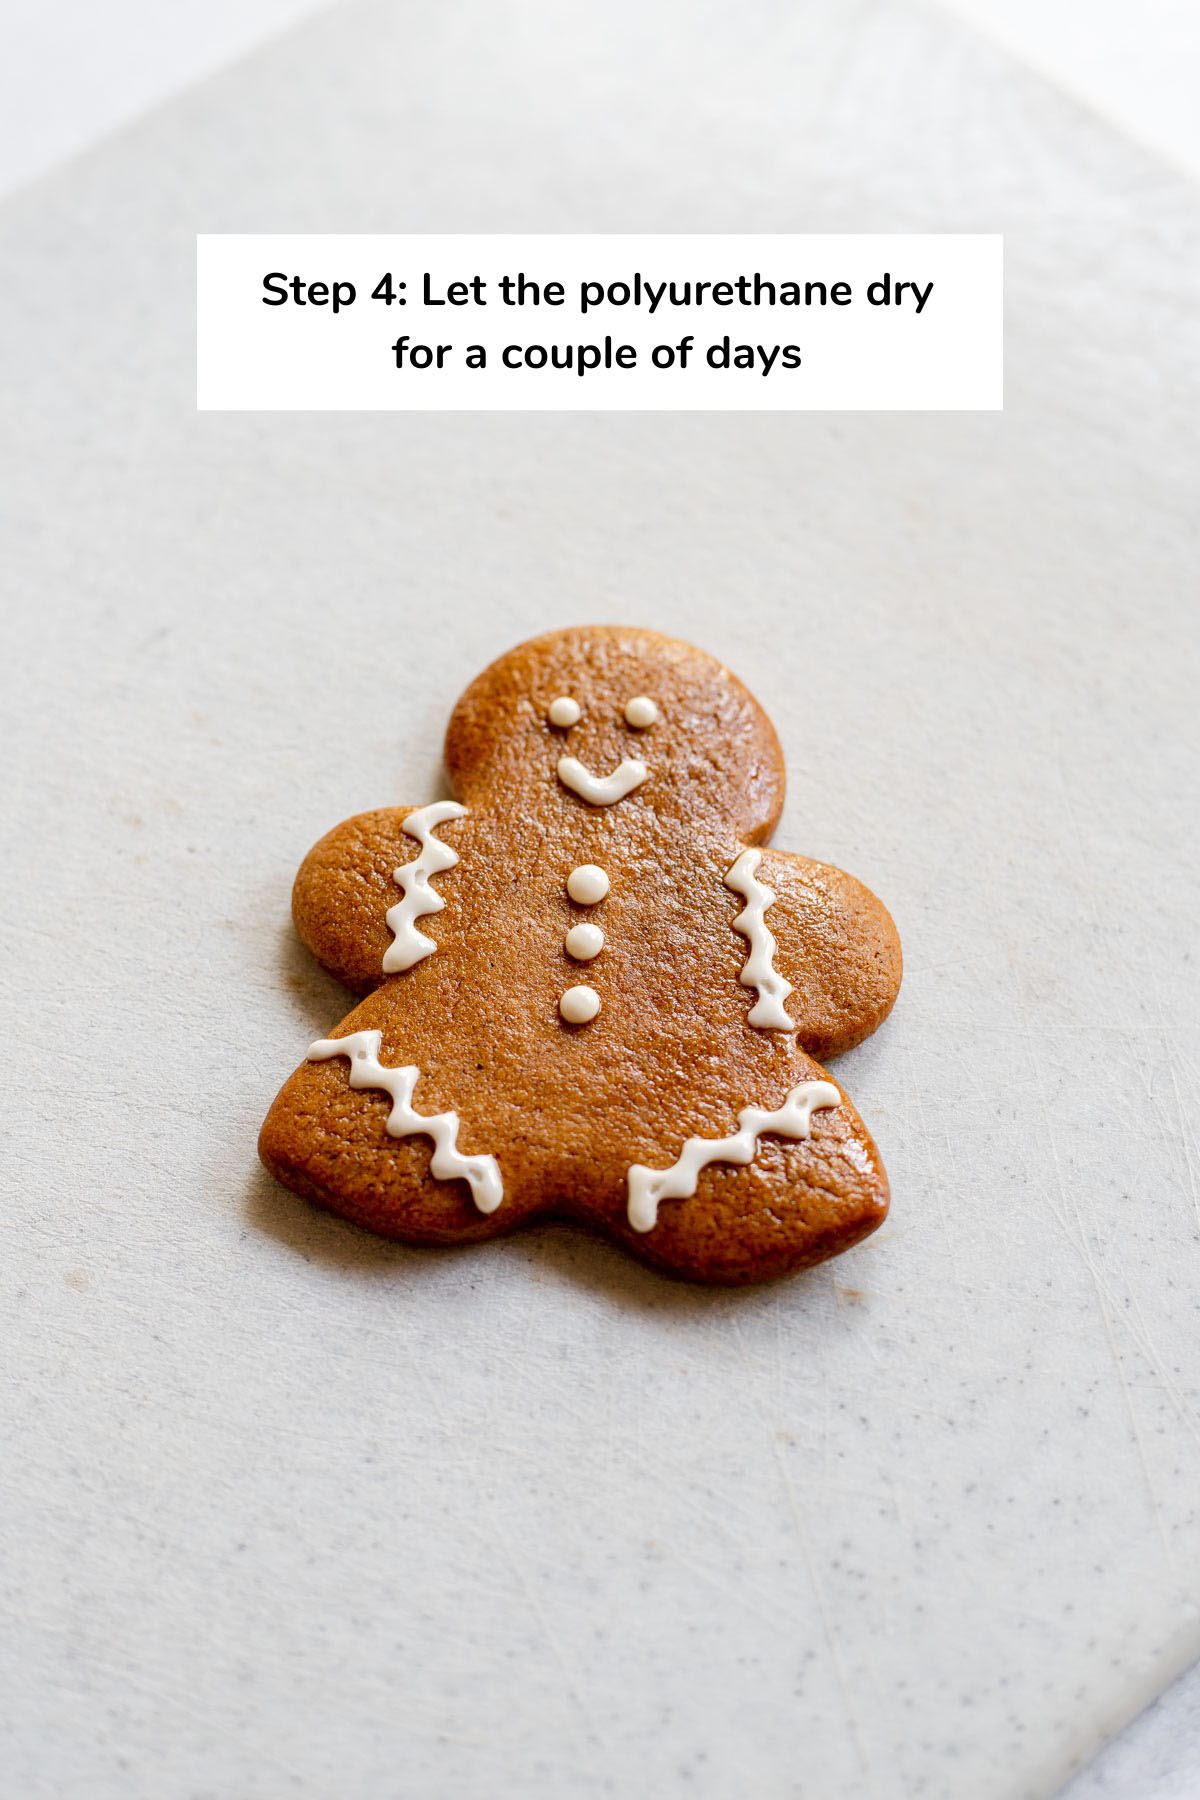 Photo of gingerbread cookie that reads 'Step 4: Let the polyurethane dry for a couple of days'